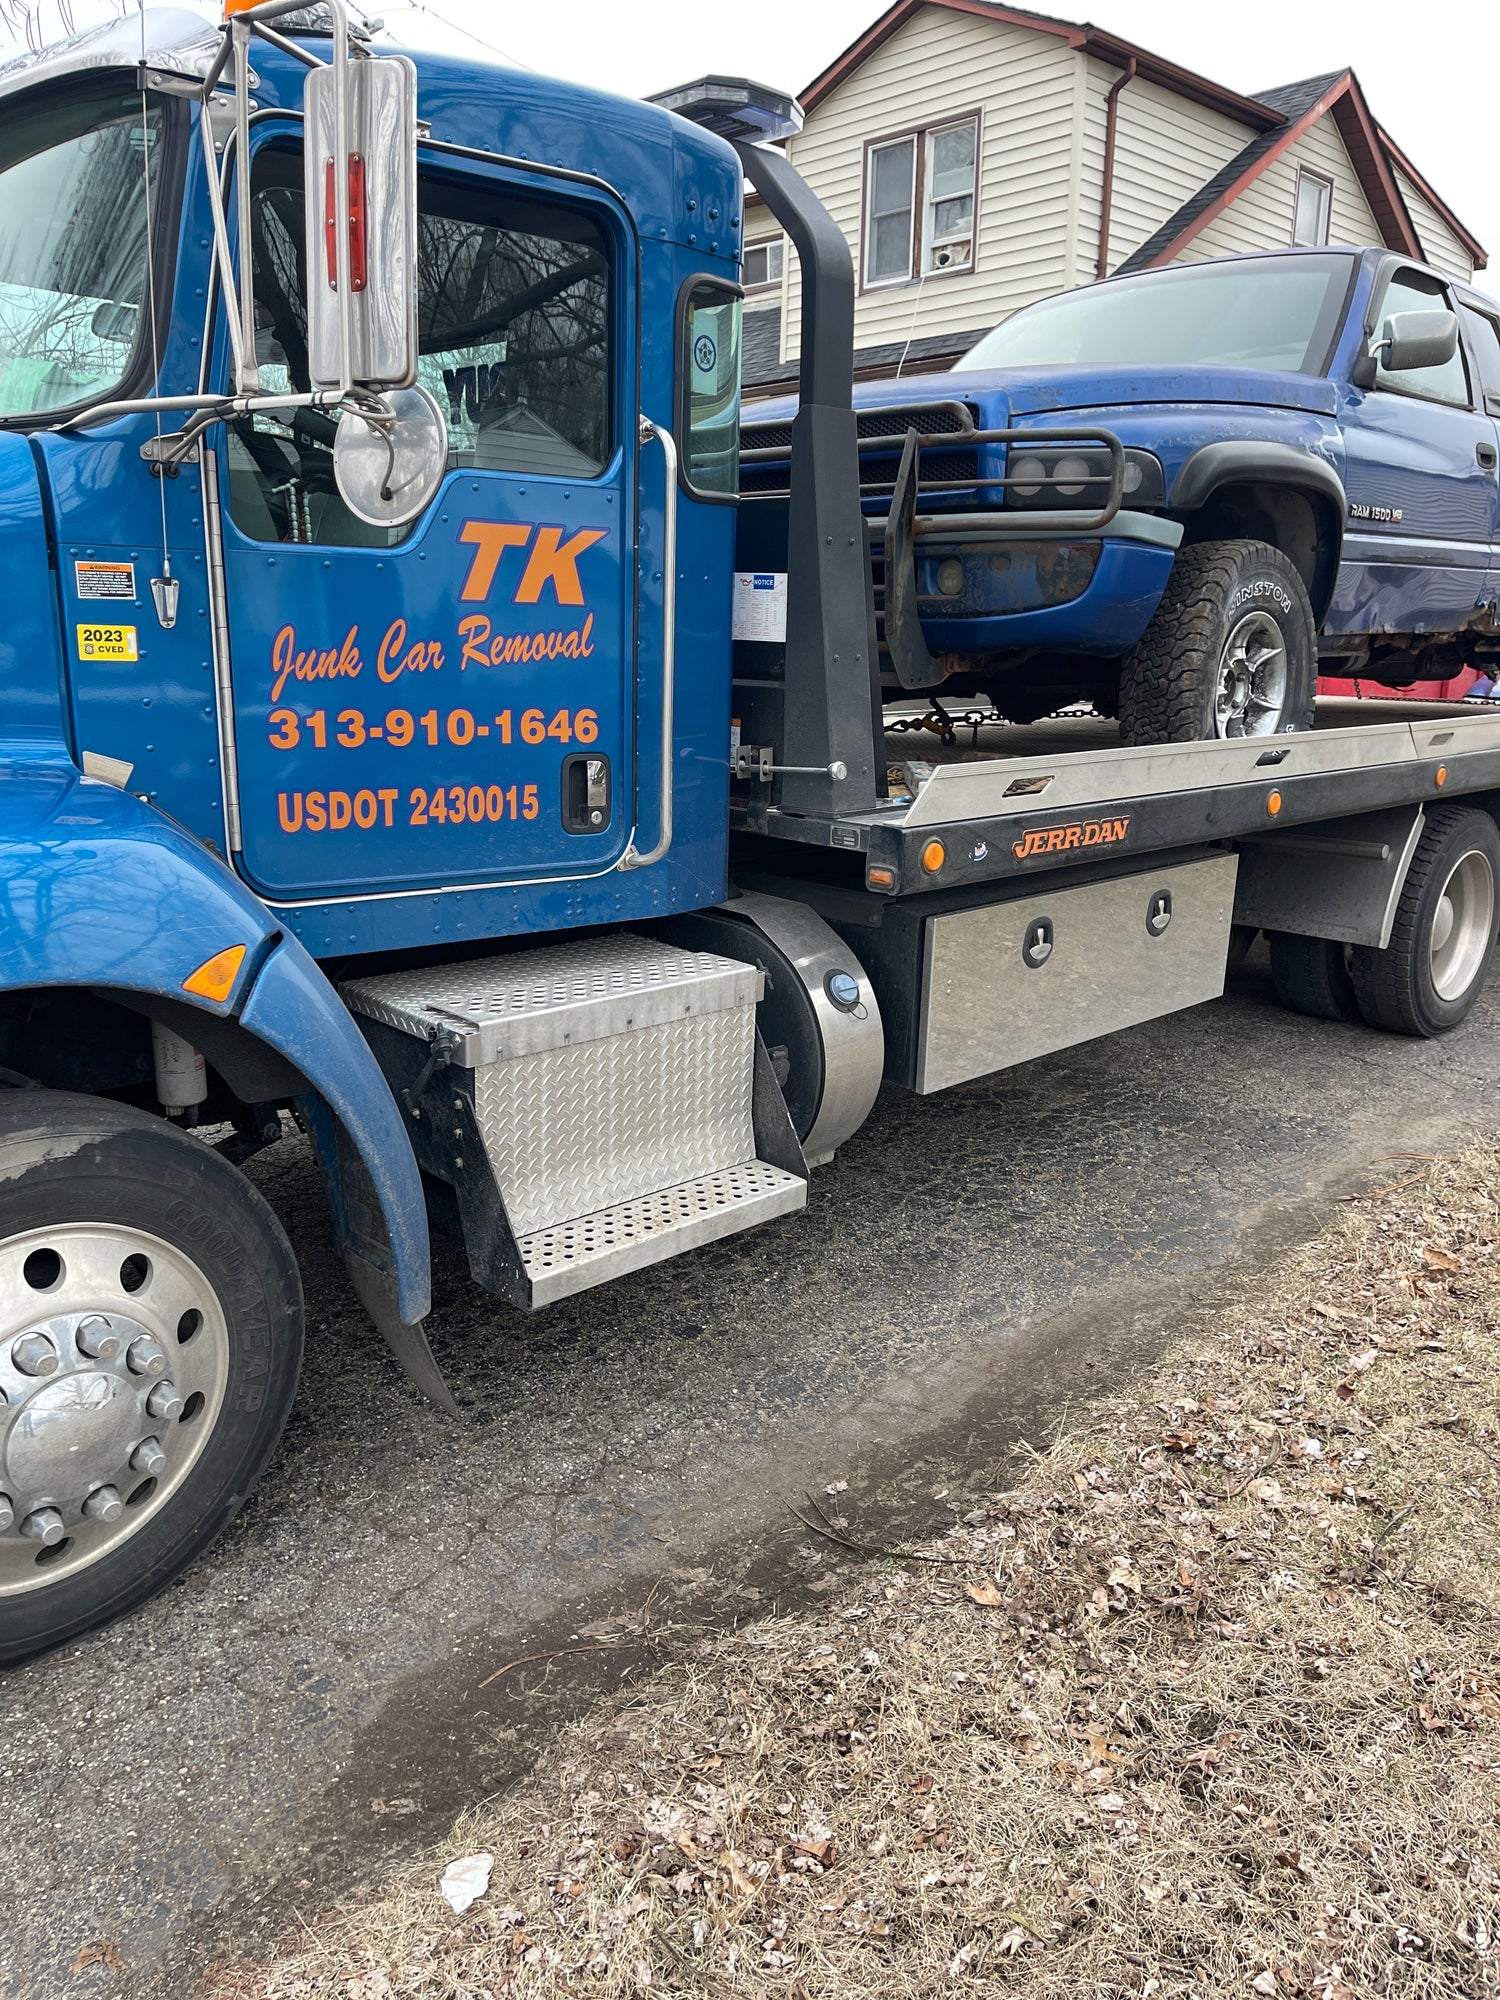 T.K. Cash For Junk Cars Blue Towing Truck